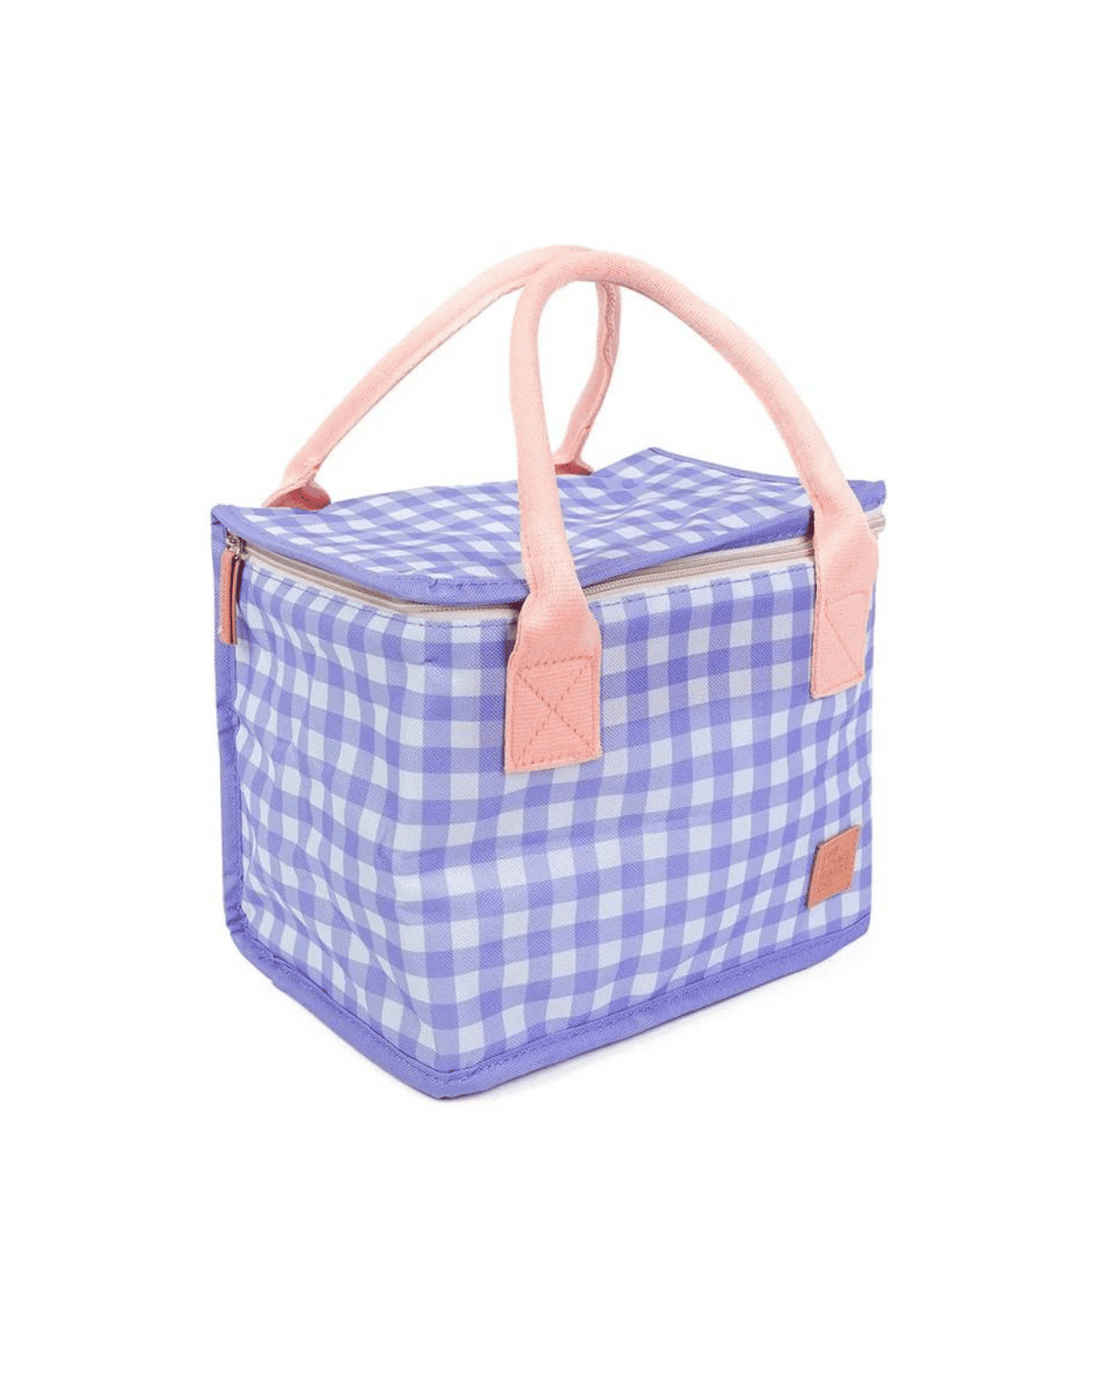 Sundown Lunch Bag by The Somewhere Co